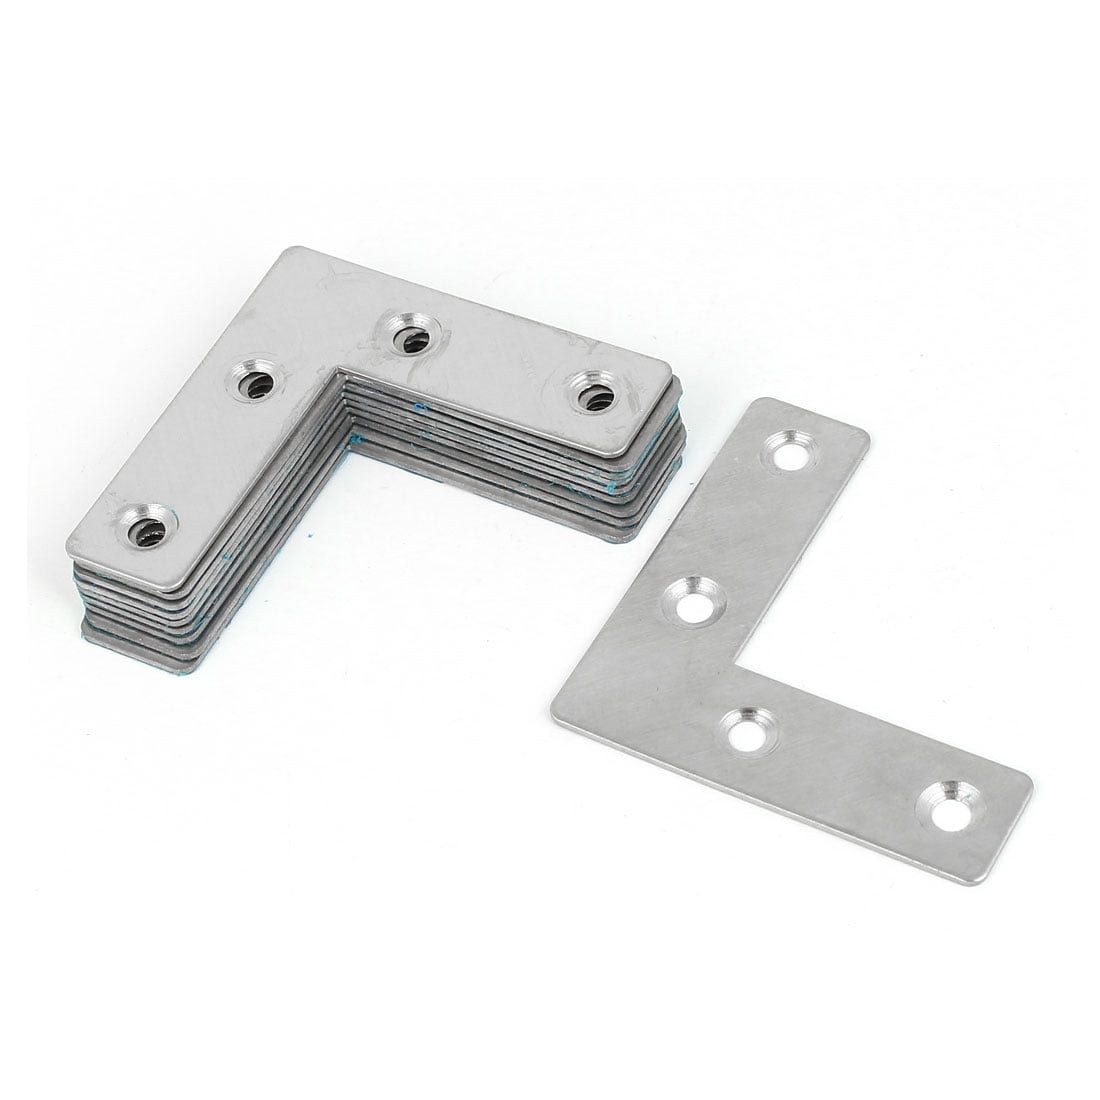 75 20mm 4 Pcs Stainless Steel Right Angle Bracket,Stainless Steel L-Shaped Corner Code/Shelf Supports,90 Degree Right Angle Brackets Heavy Duty,Right Angle Bracket Fastener with Screws,125